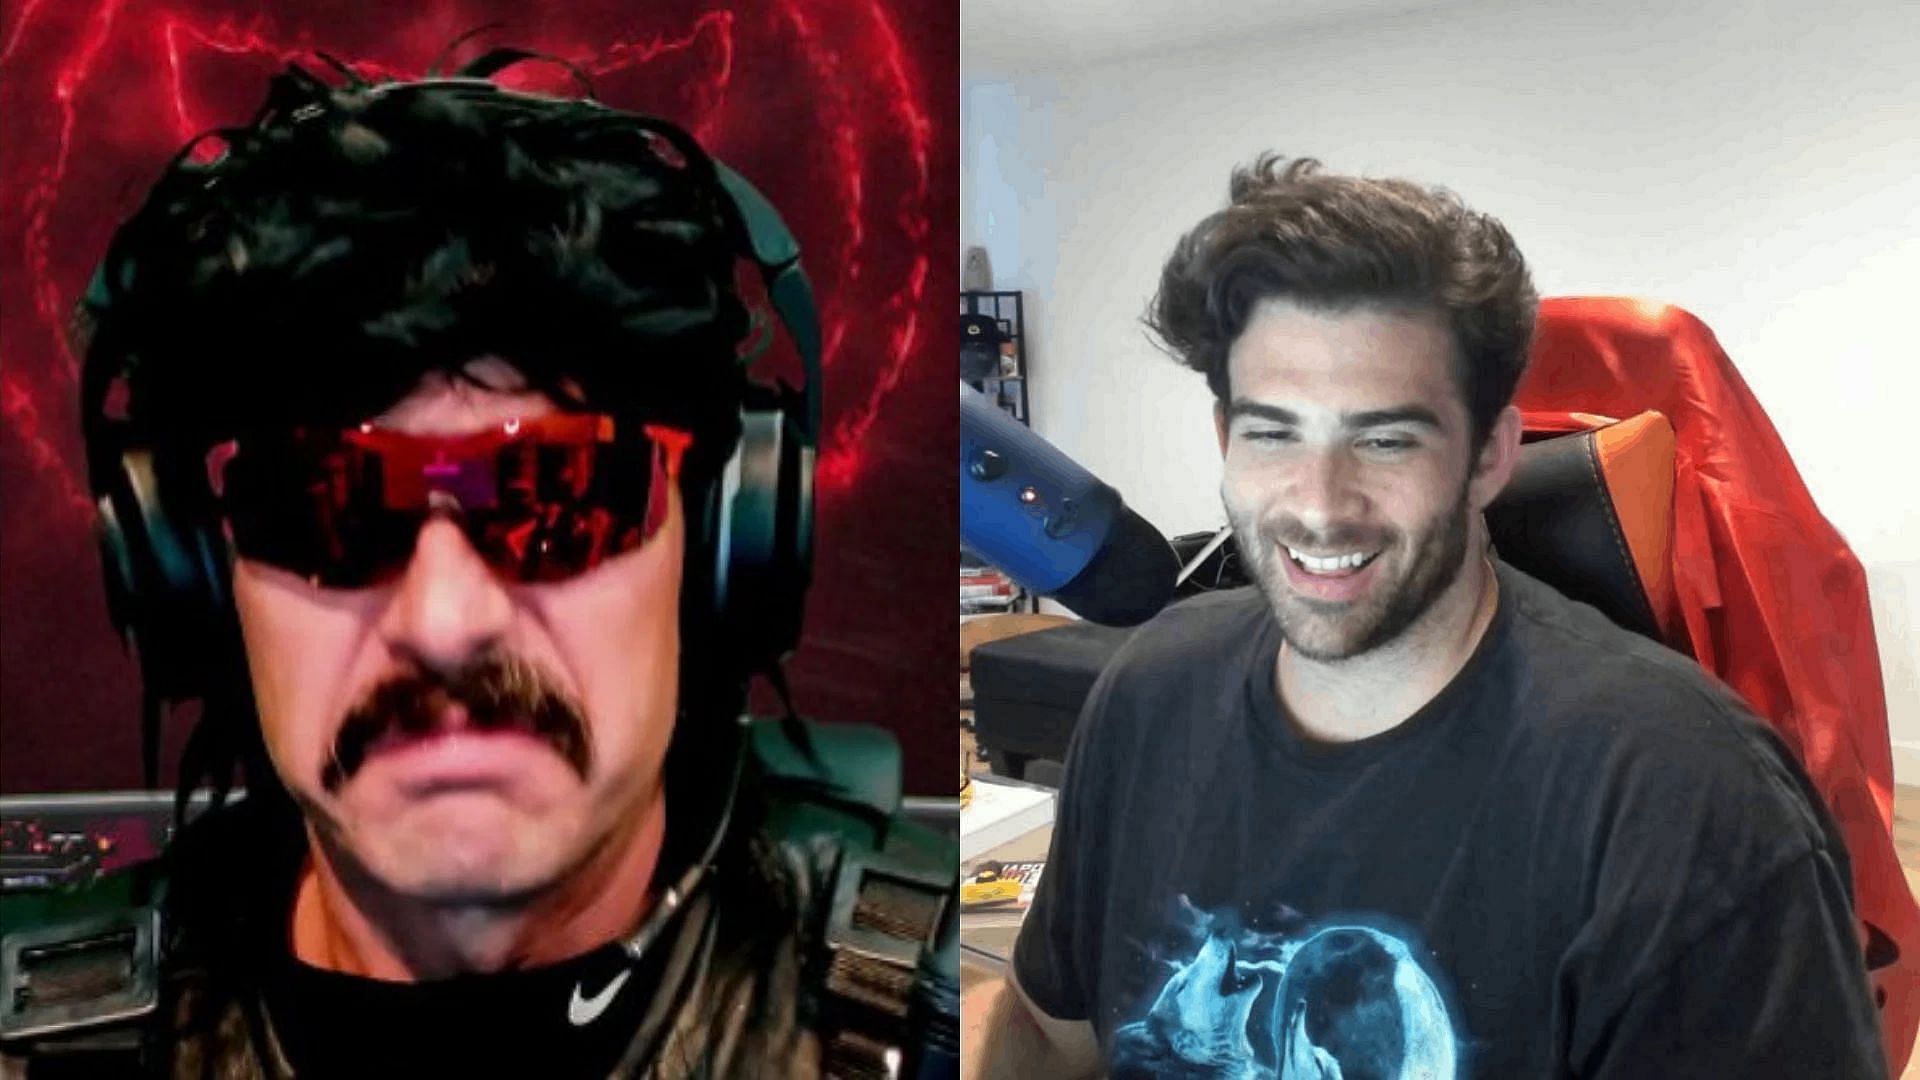 HasanAbi claps back at Dr DisRespect for his phony comment (Image via Sportskeeda)